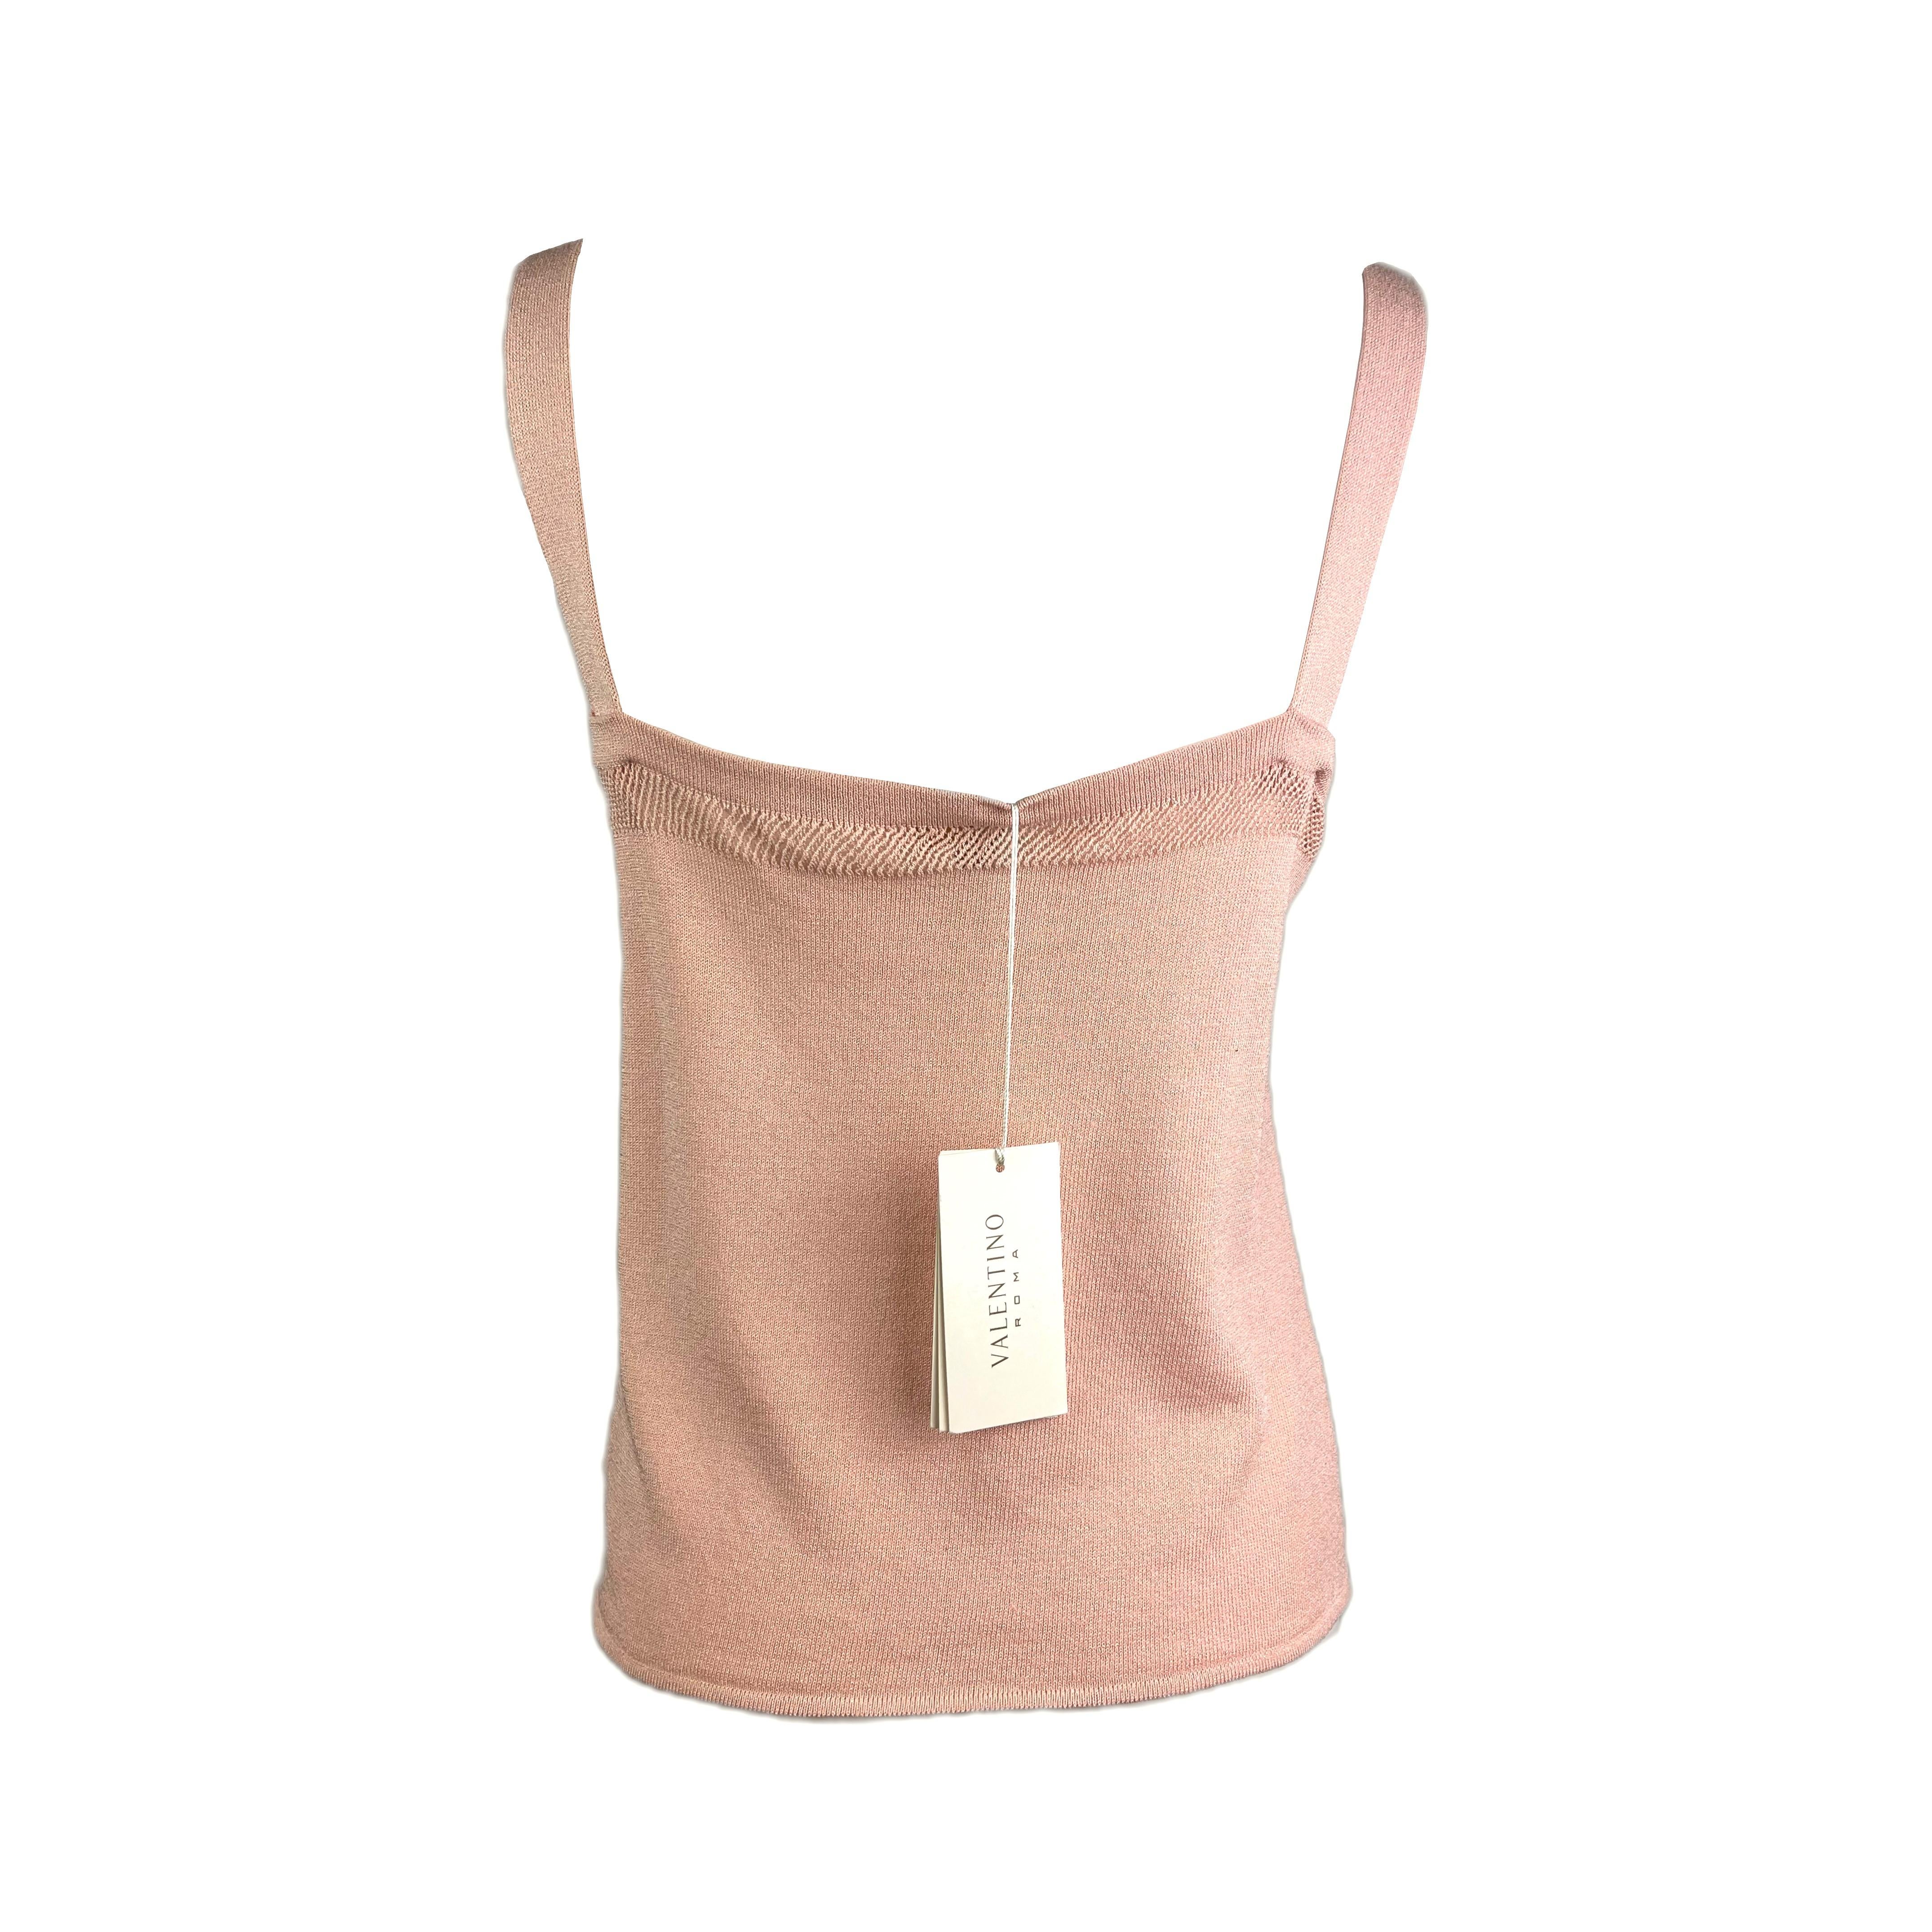 A knitted original tank top still new and unworn, still with its original price tag carrying a 280€ indication. The pink colour is very trendy these days and it belongs to a recent collection designed by Pierpaolo Piccioli. It features a decoration